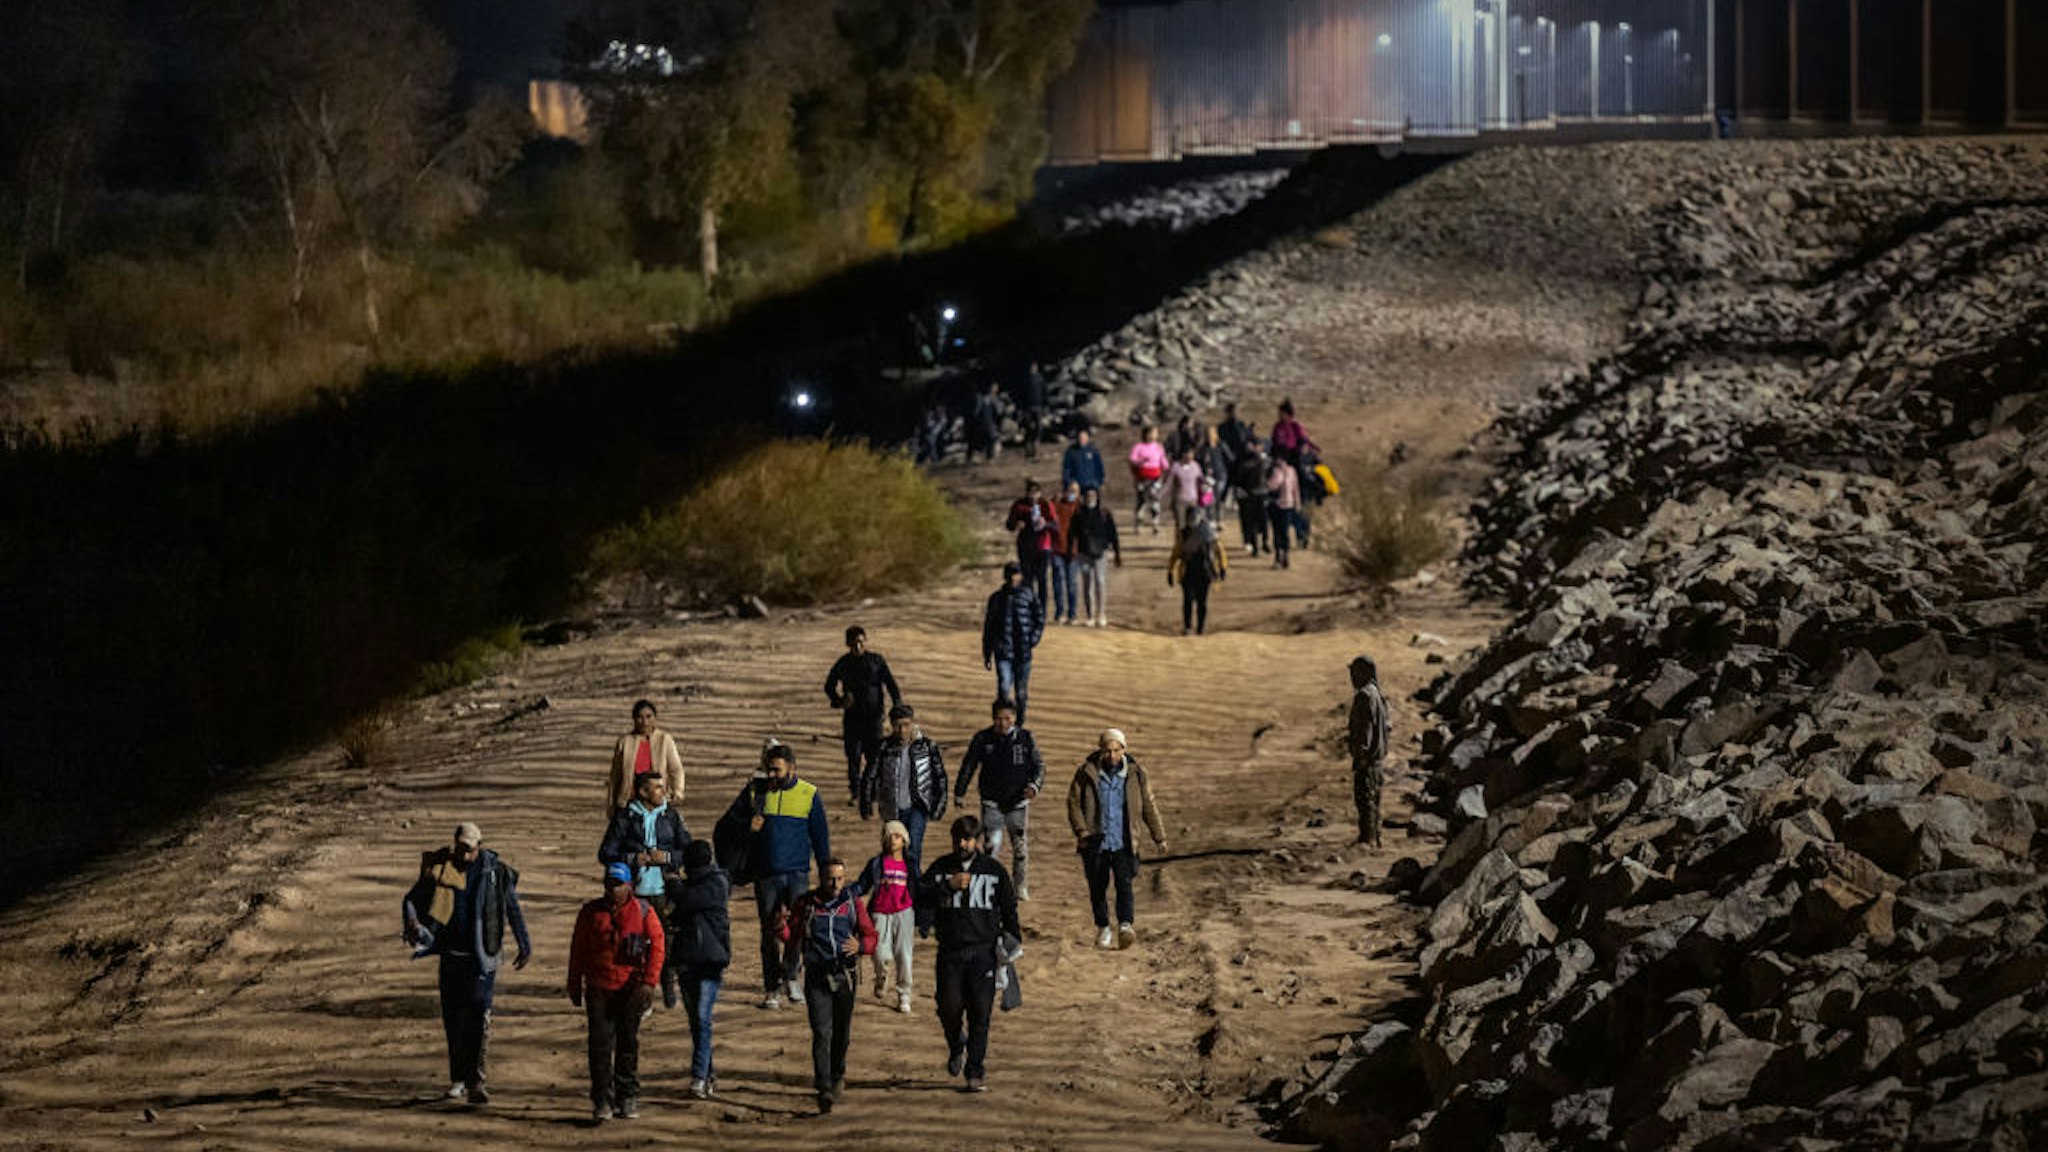 YUMA, ARIZONA - DECEMBER 30: Immigrants walk along the U.S.-Mexico border barrier on their way to await processing by the U.S. Border Patrol after crossing from Mexico on December 30, 2022 in Yuma, Arizona. (Photo by Qian Weizhong/VCG via Getty Images)